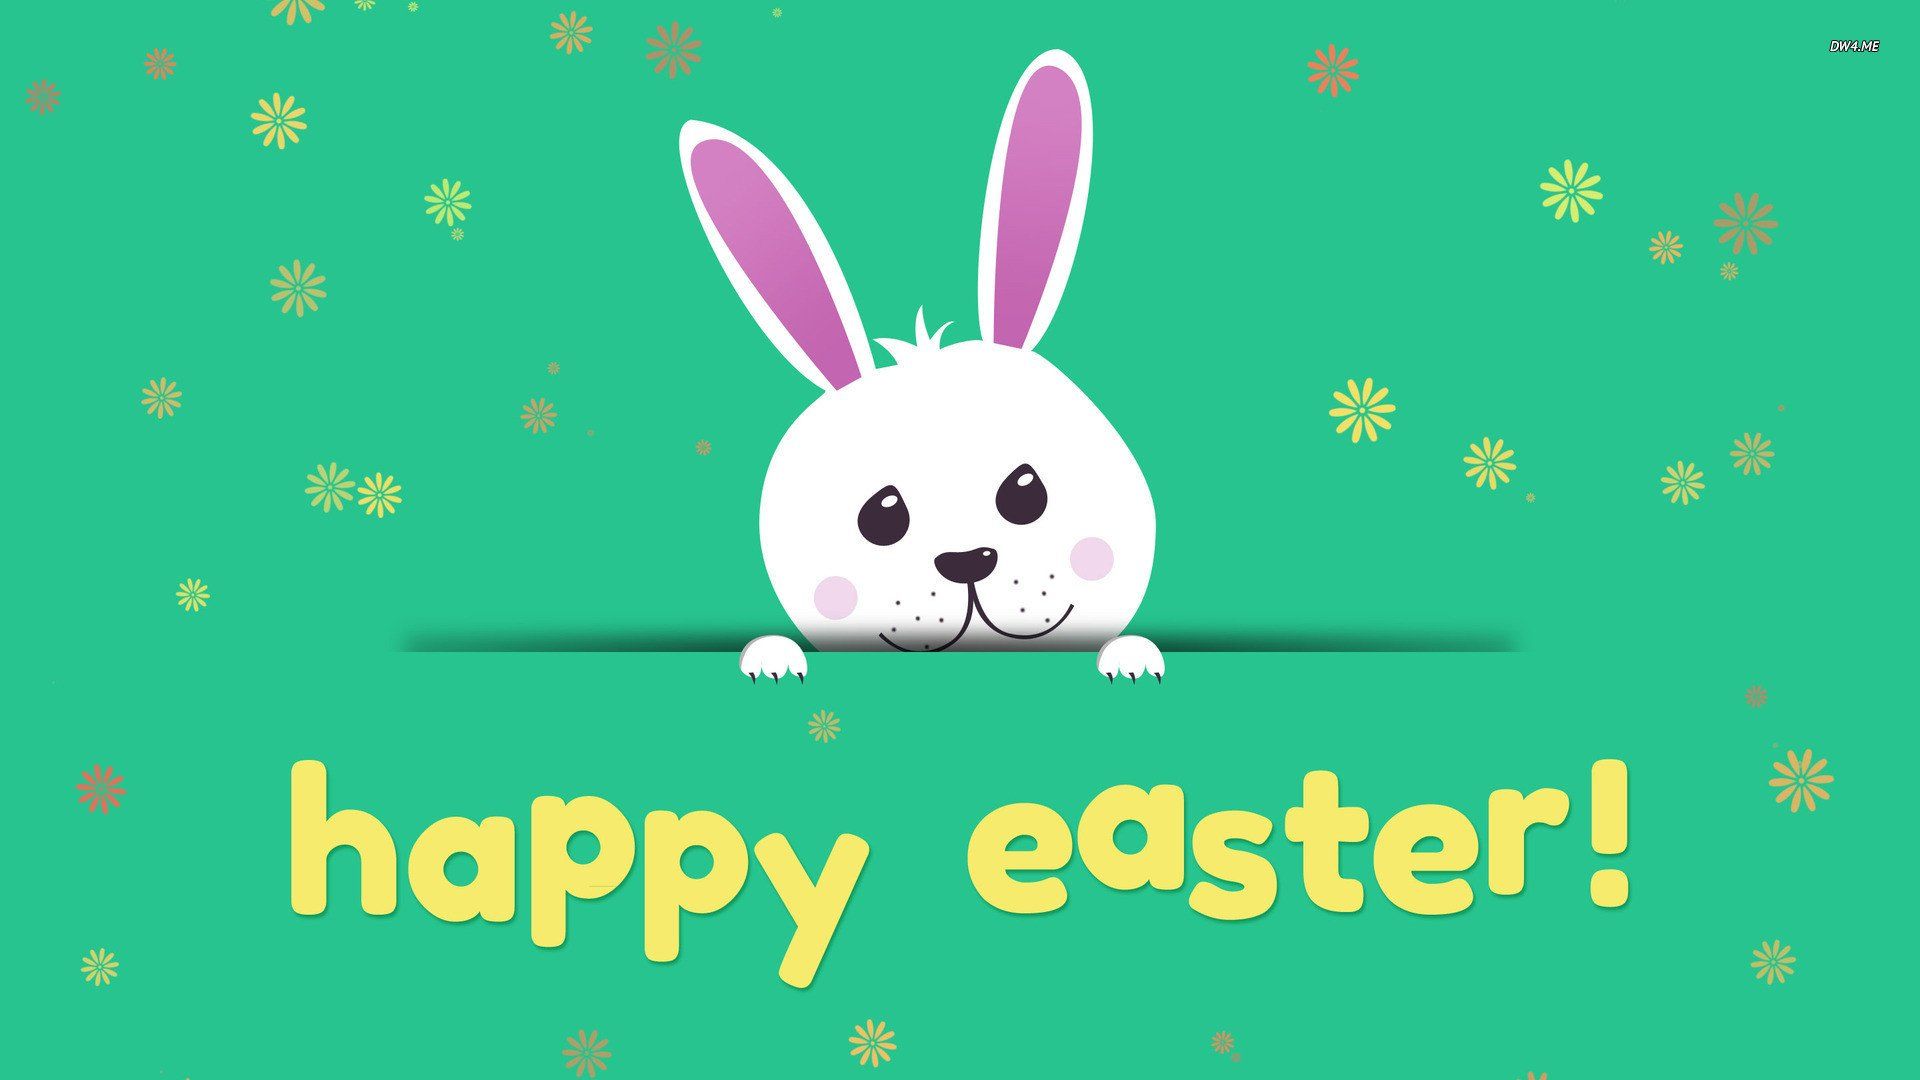 Free download 64 Cute Easter Wallpaper [1920x1080] for your Desktop, Mobile & Tablet. Explore Happy Easter Background For Desktop. Happy Easter Wallpaper, Happy Easter Desktop Wallpaper, Free